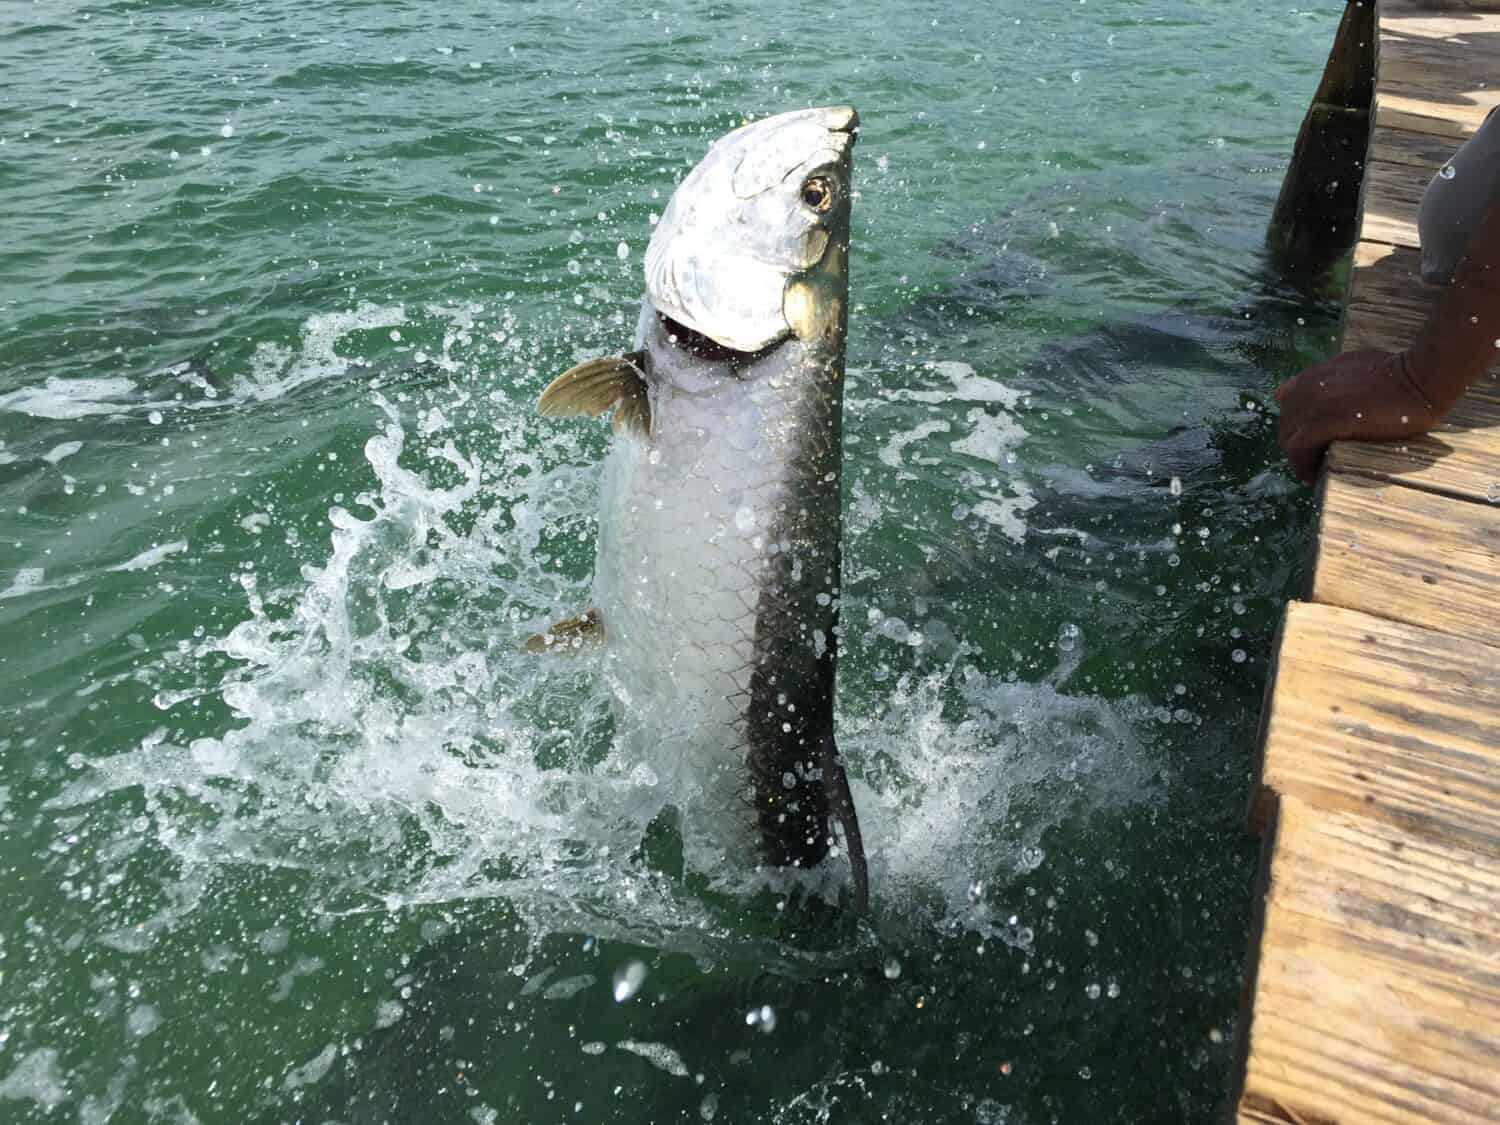 Tarpon jumping out of the water